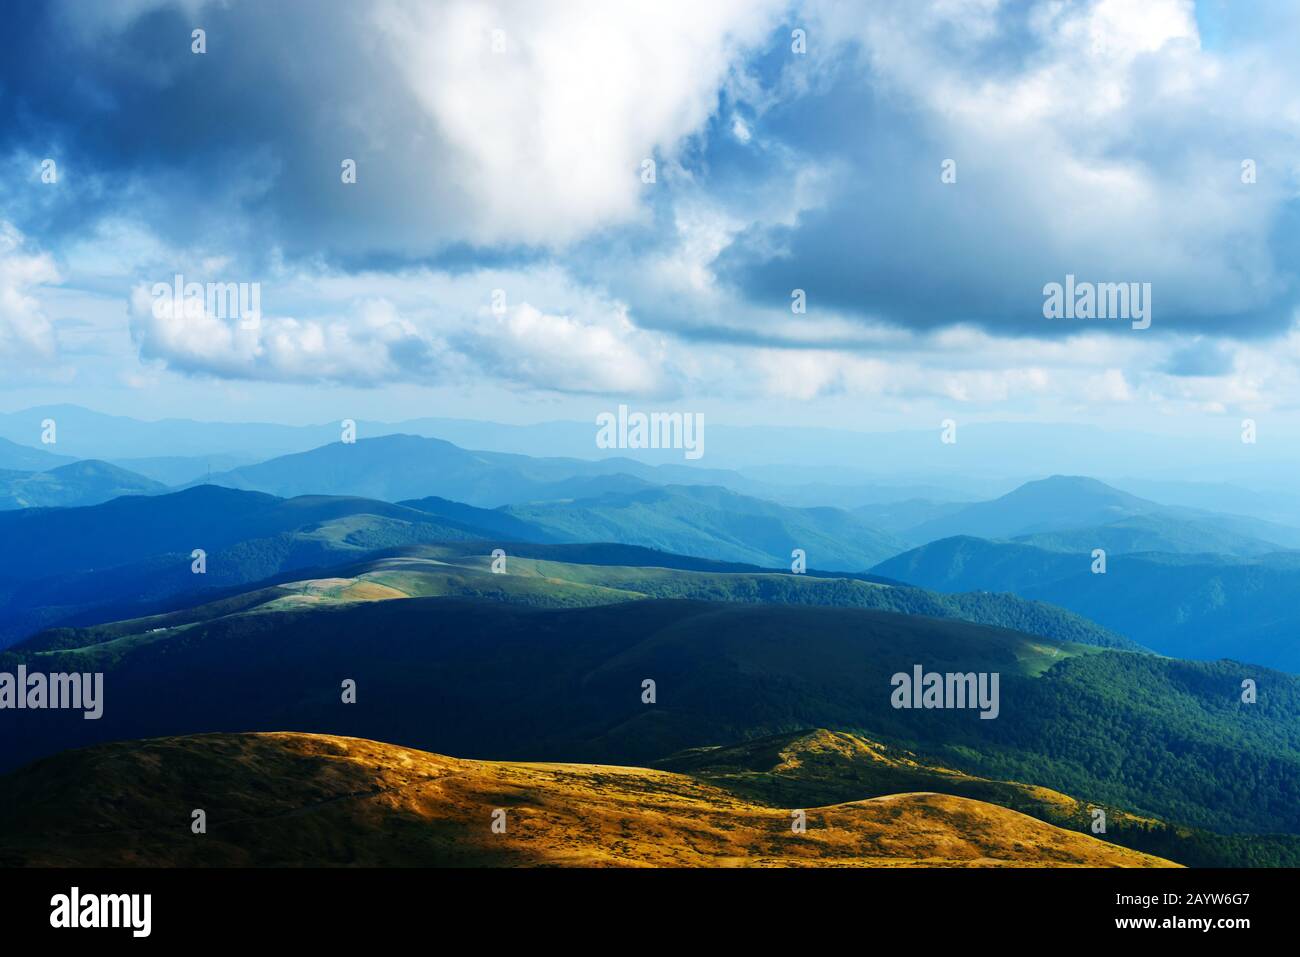 Incredible view of the blue hills glowing by evening sunlight. Dramatic scene with summer mountains. Landscape photography Stock Photo